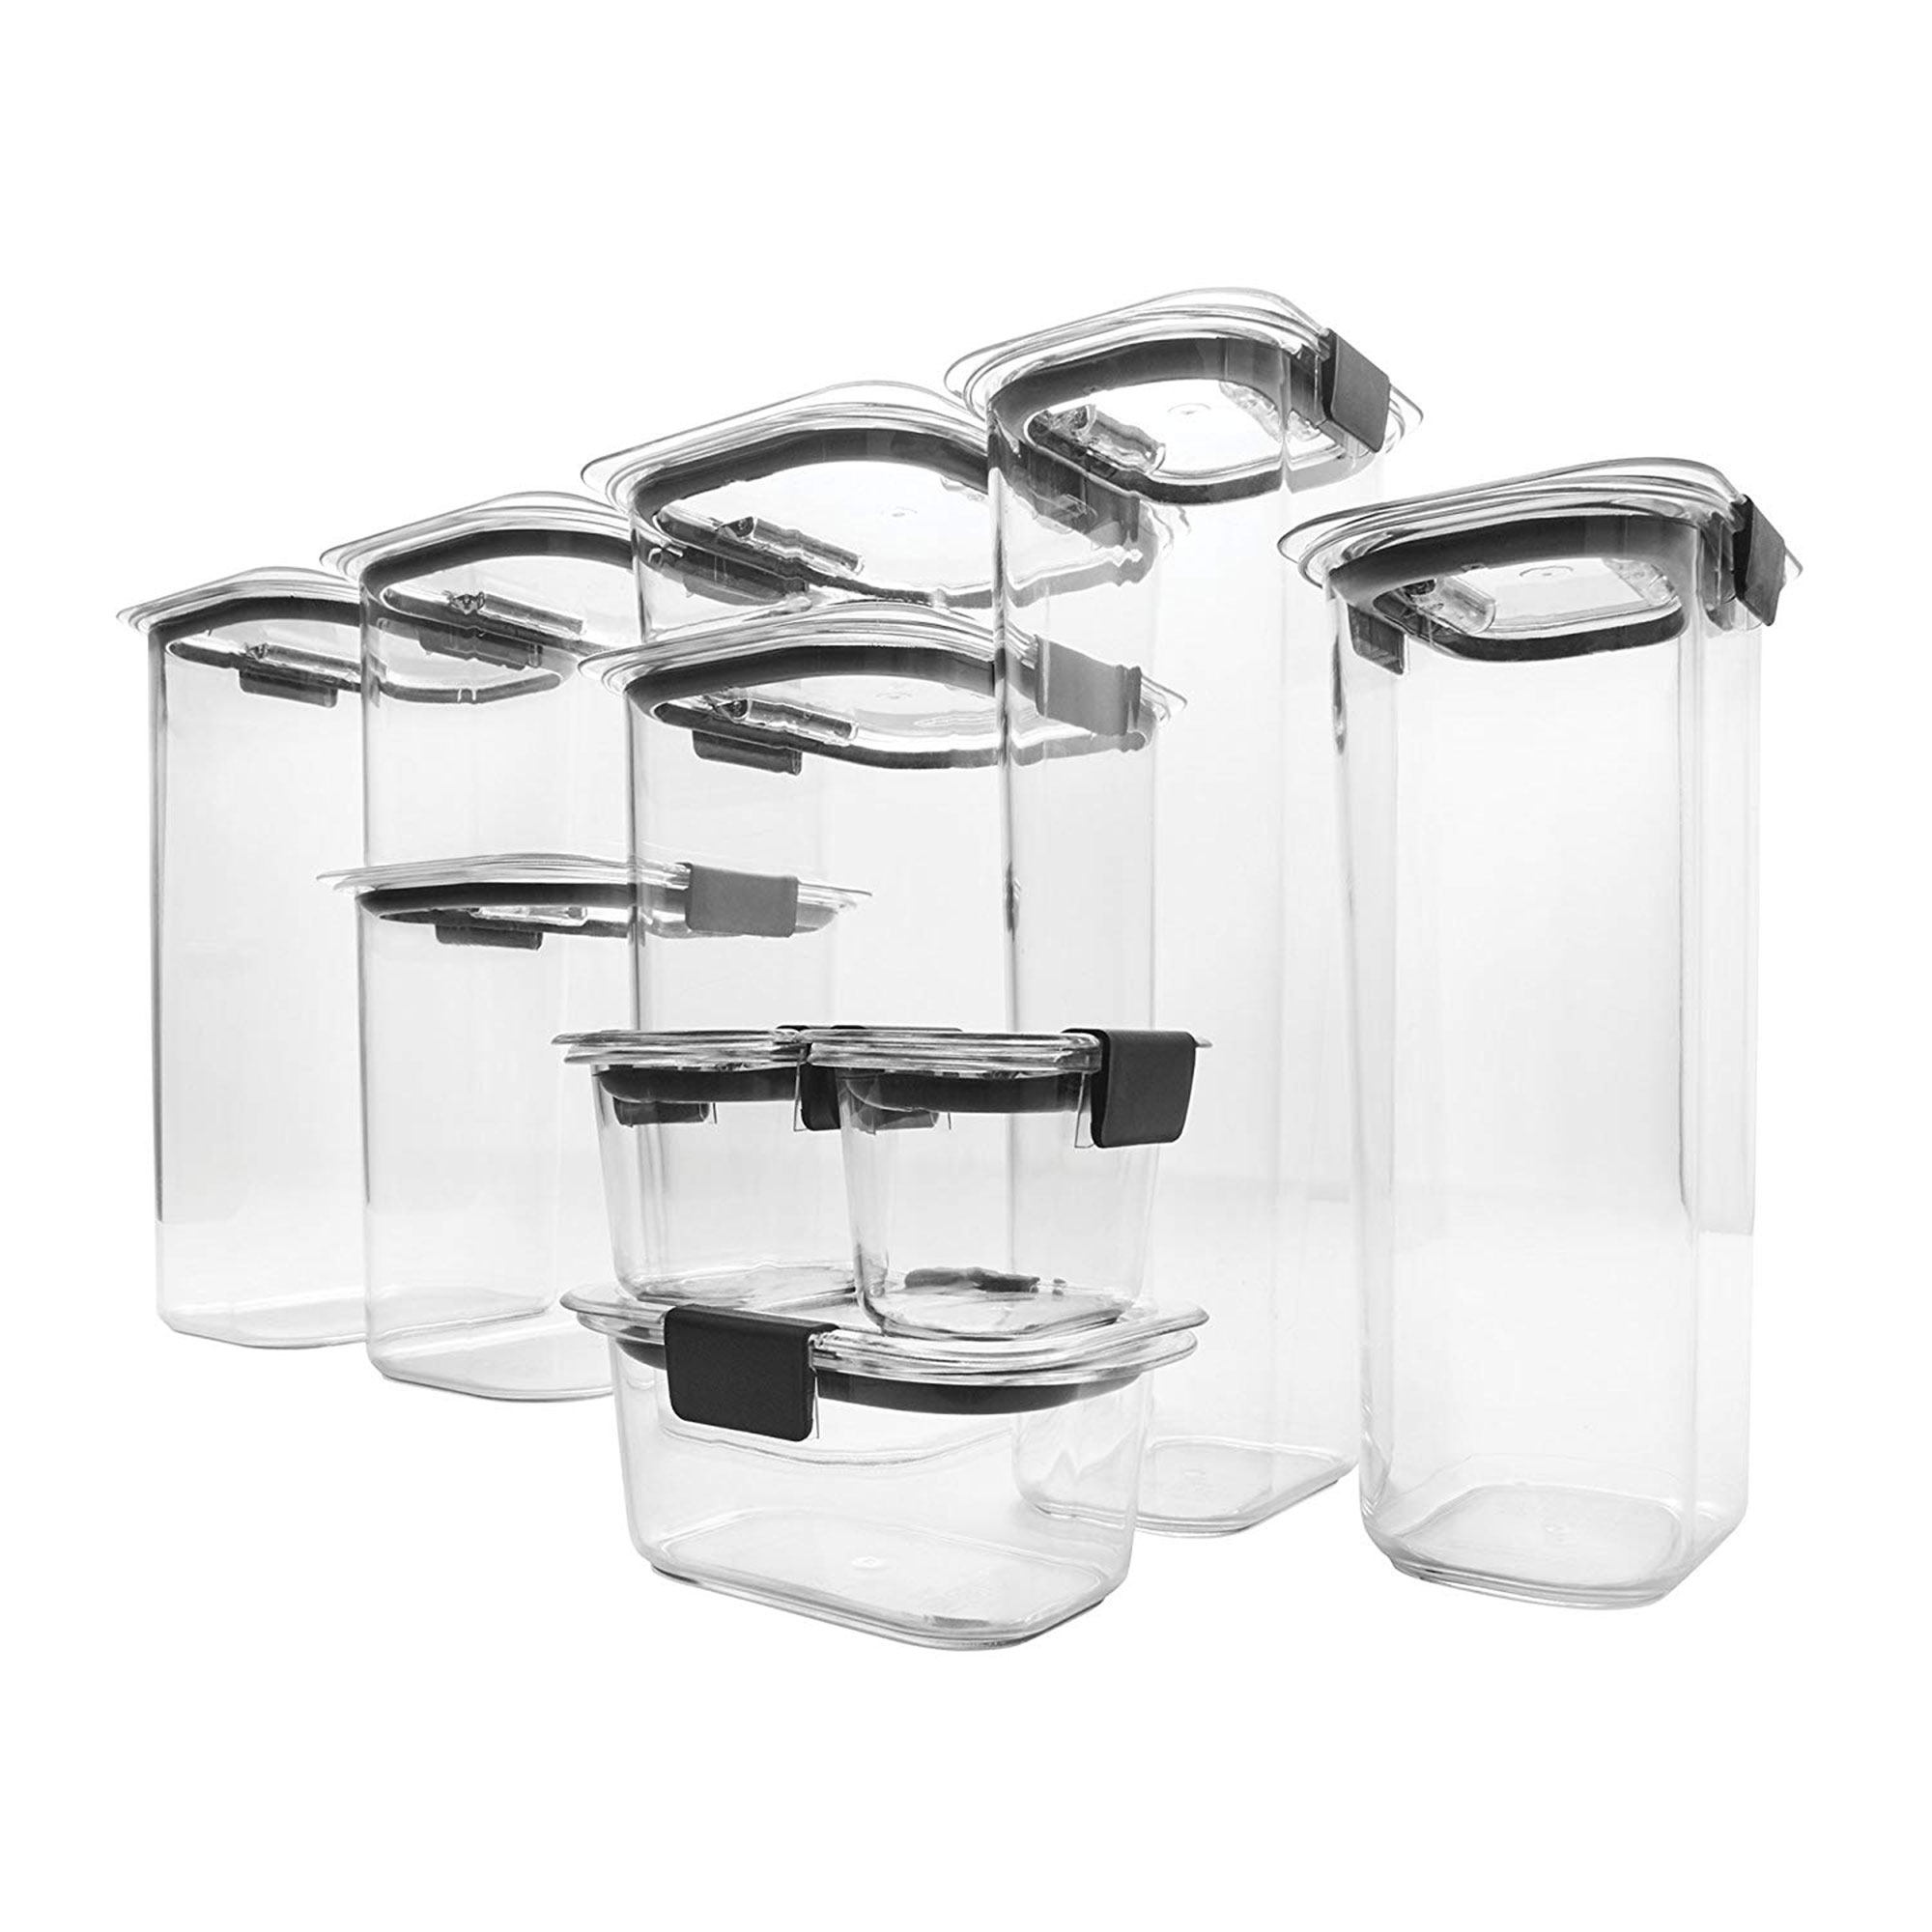 Rubbermaid Brilliance 10 Piece Plastic Food Storage Container Set w/ Lids, Clear - image 1 of 5